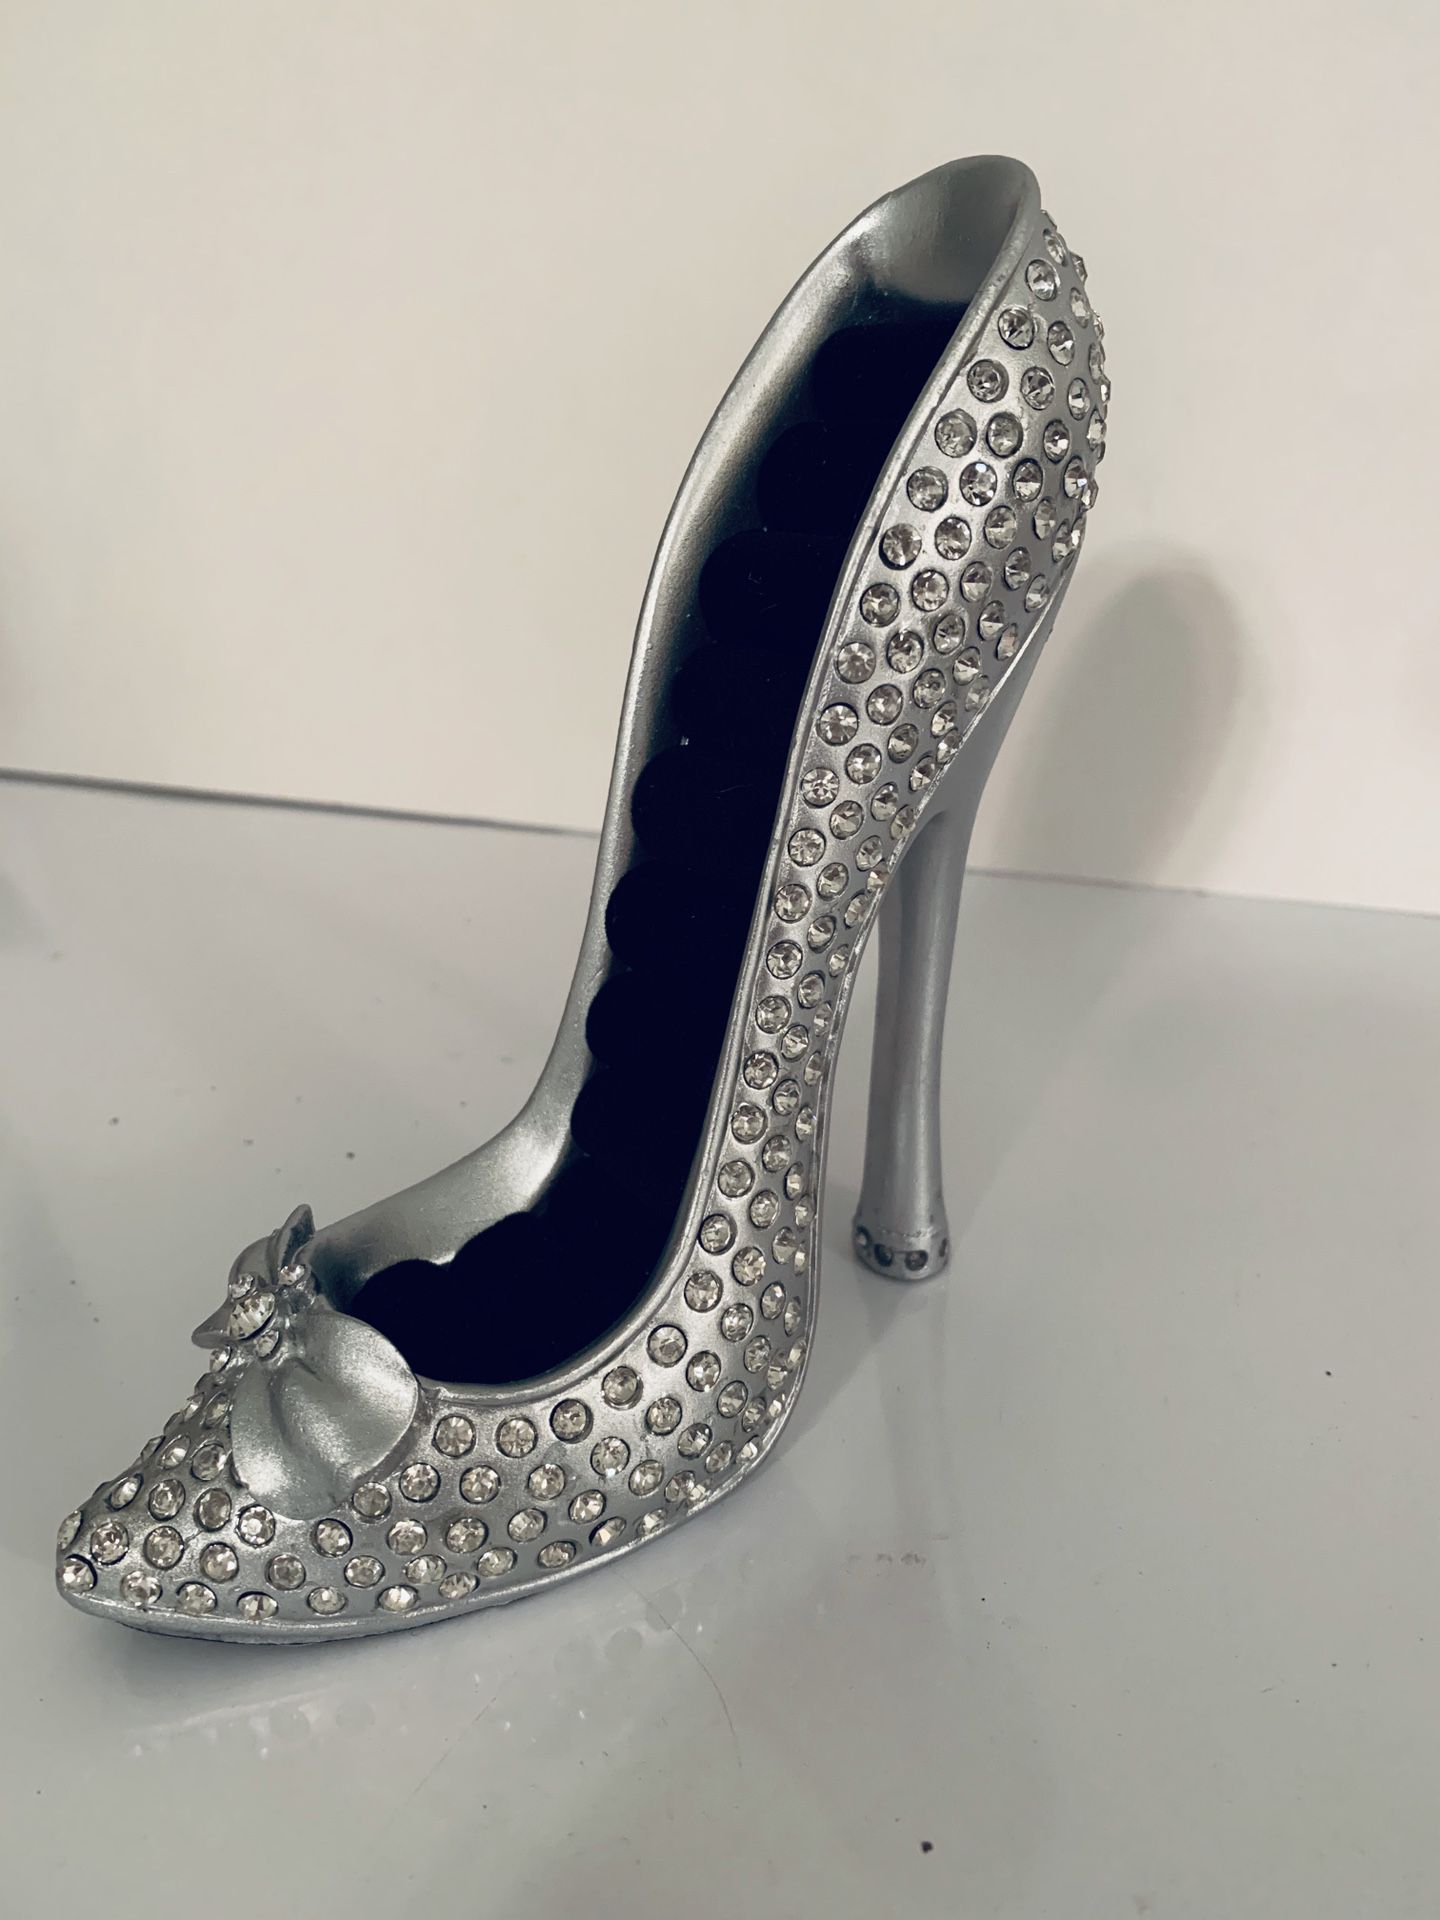 Ring holder shoe rhinestones all over it. New in box.